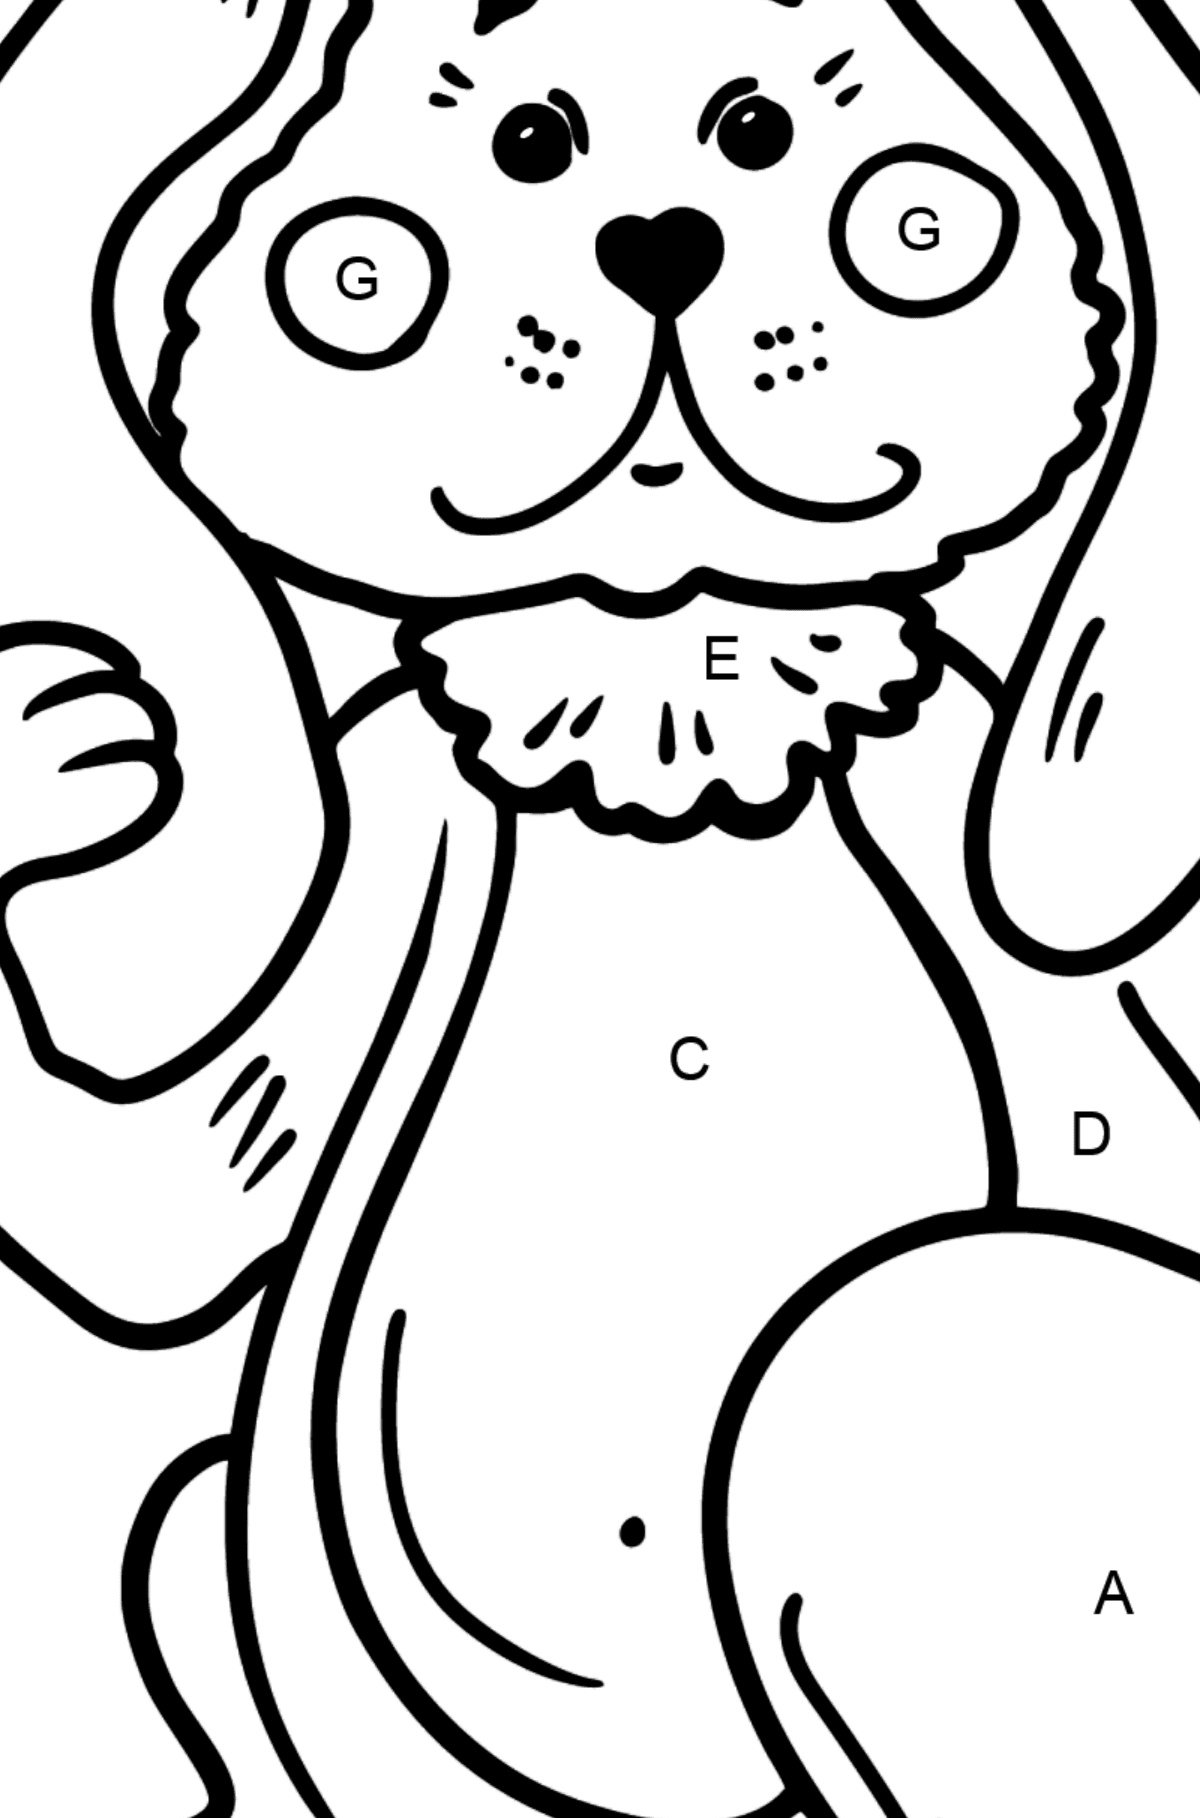 Sad Bunny coloring page - Coloring by Letters for Kids